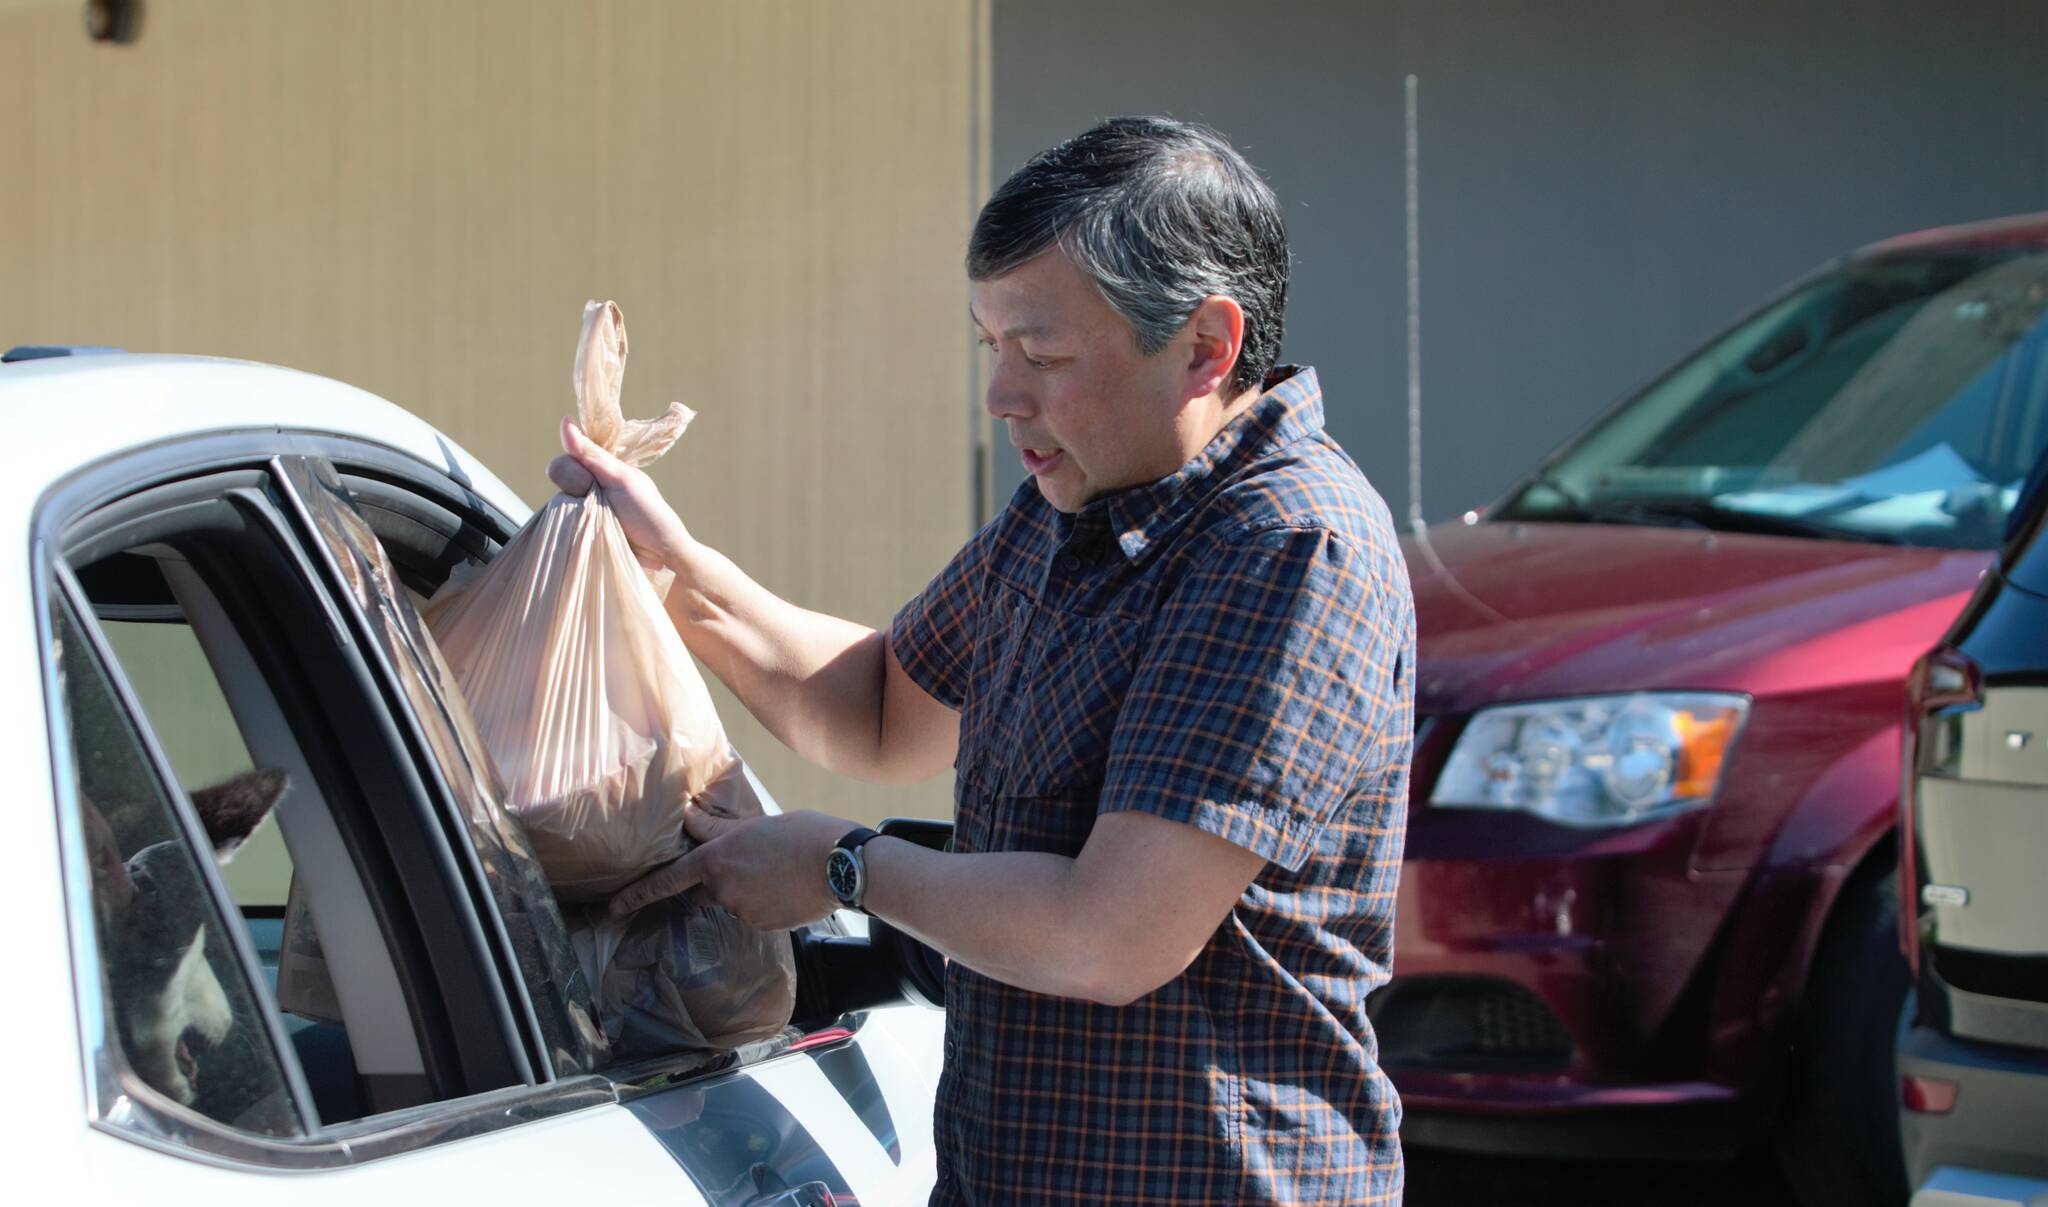 Sunnyslope Elementary counselor Roger Mangahas loads a meal for a veteran's family into the passenger side of the car. Elisha Meyer/Kitsap News Group Photos